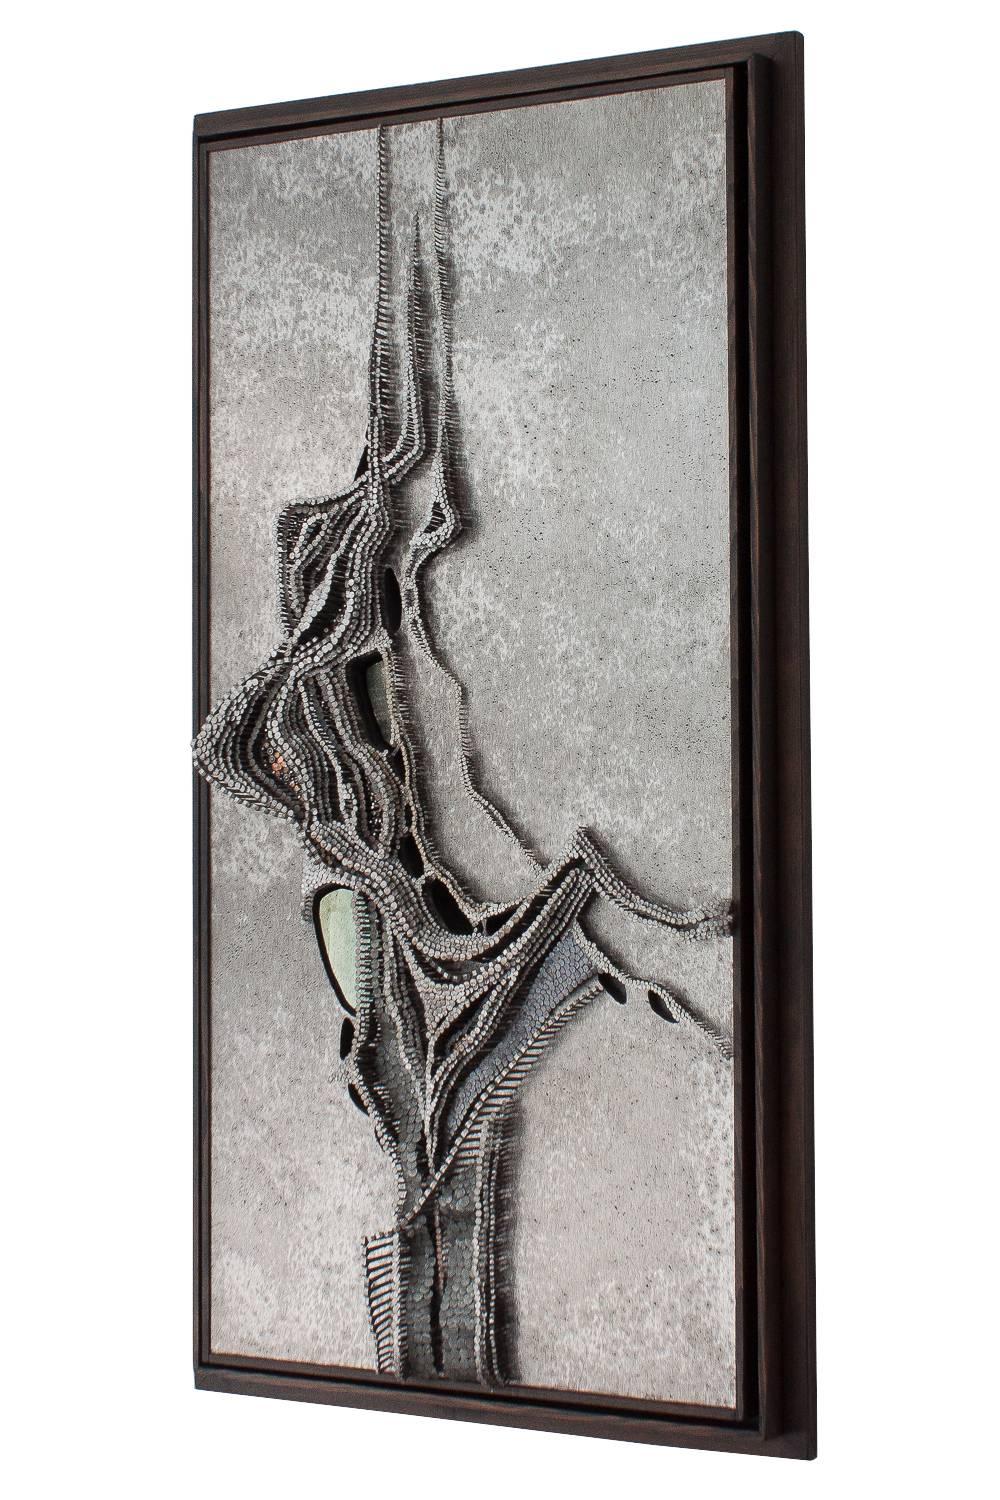 Brutalist abstract hammered nail wall sculpture attributed to Robert Harley Seyle, circa 1970s, this artwork is unsigned but is most likely the creation of Robert Harley Seyle. The mix-media wall-mounted sculpture is constructed from hand-hammered